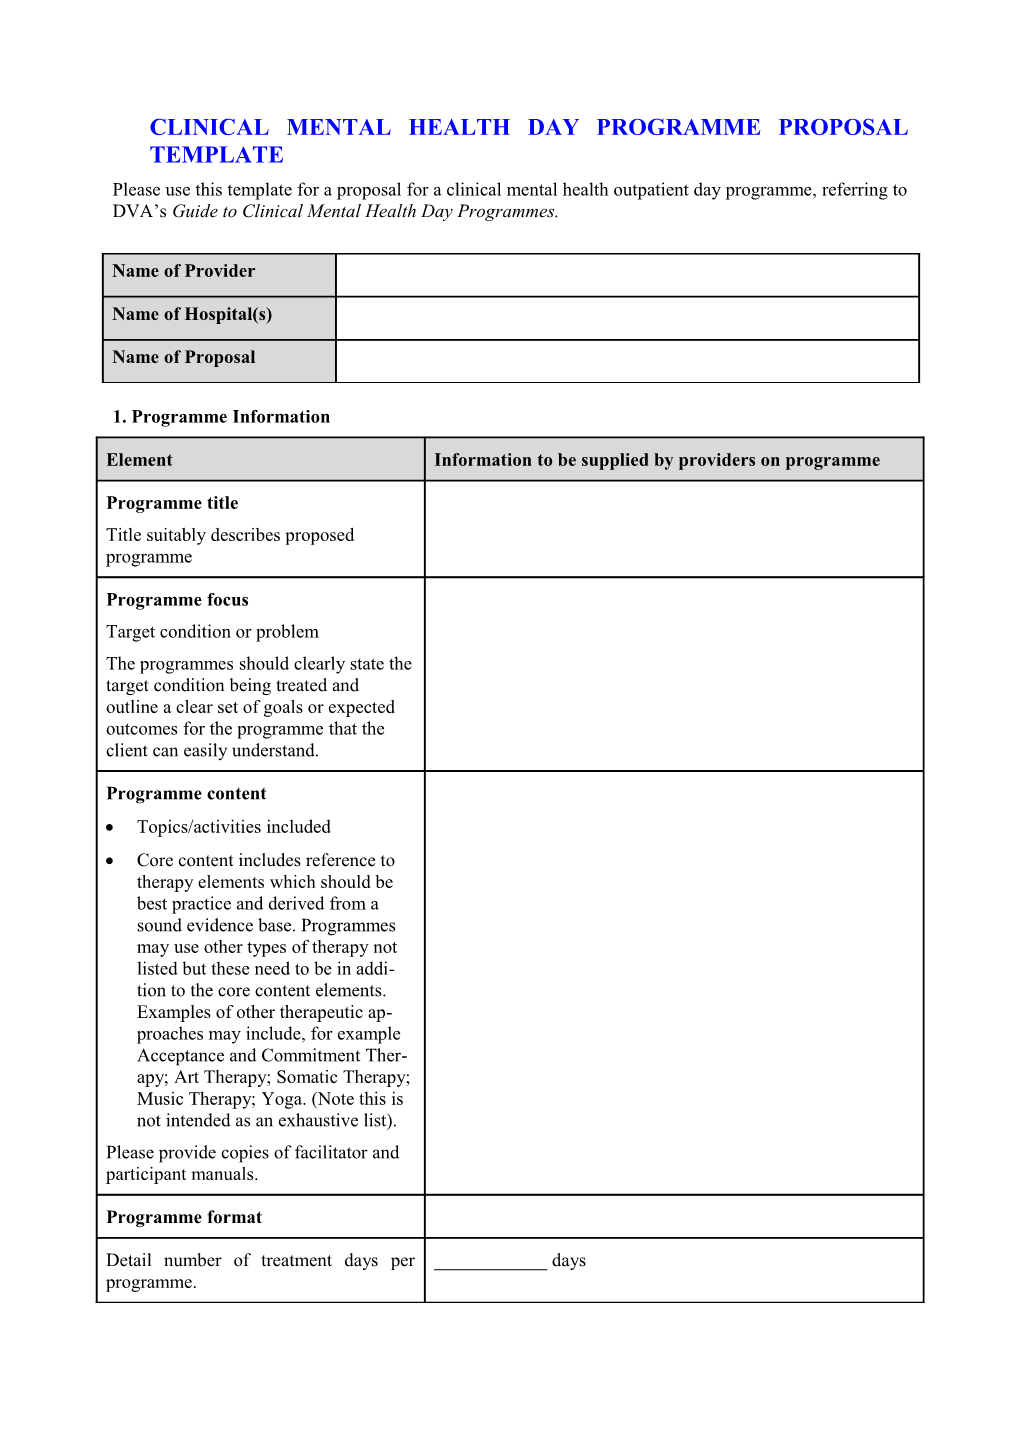 Clinical Mental Health Day Programme Proposal Template